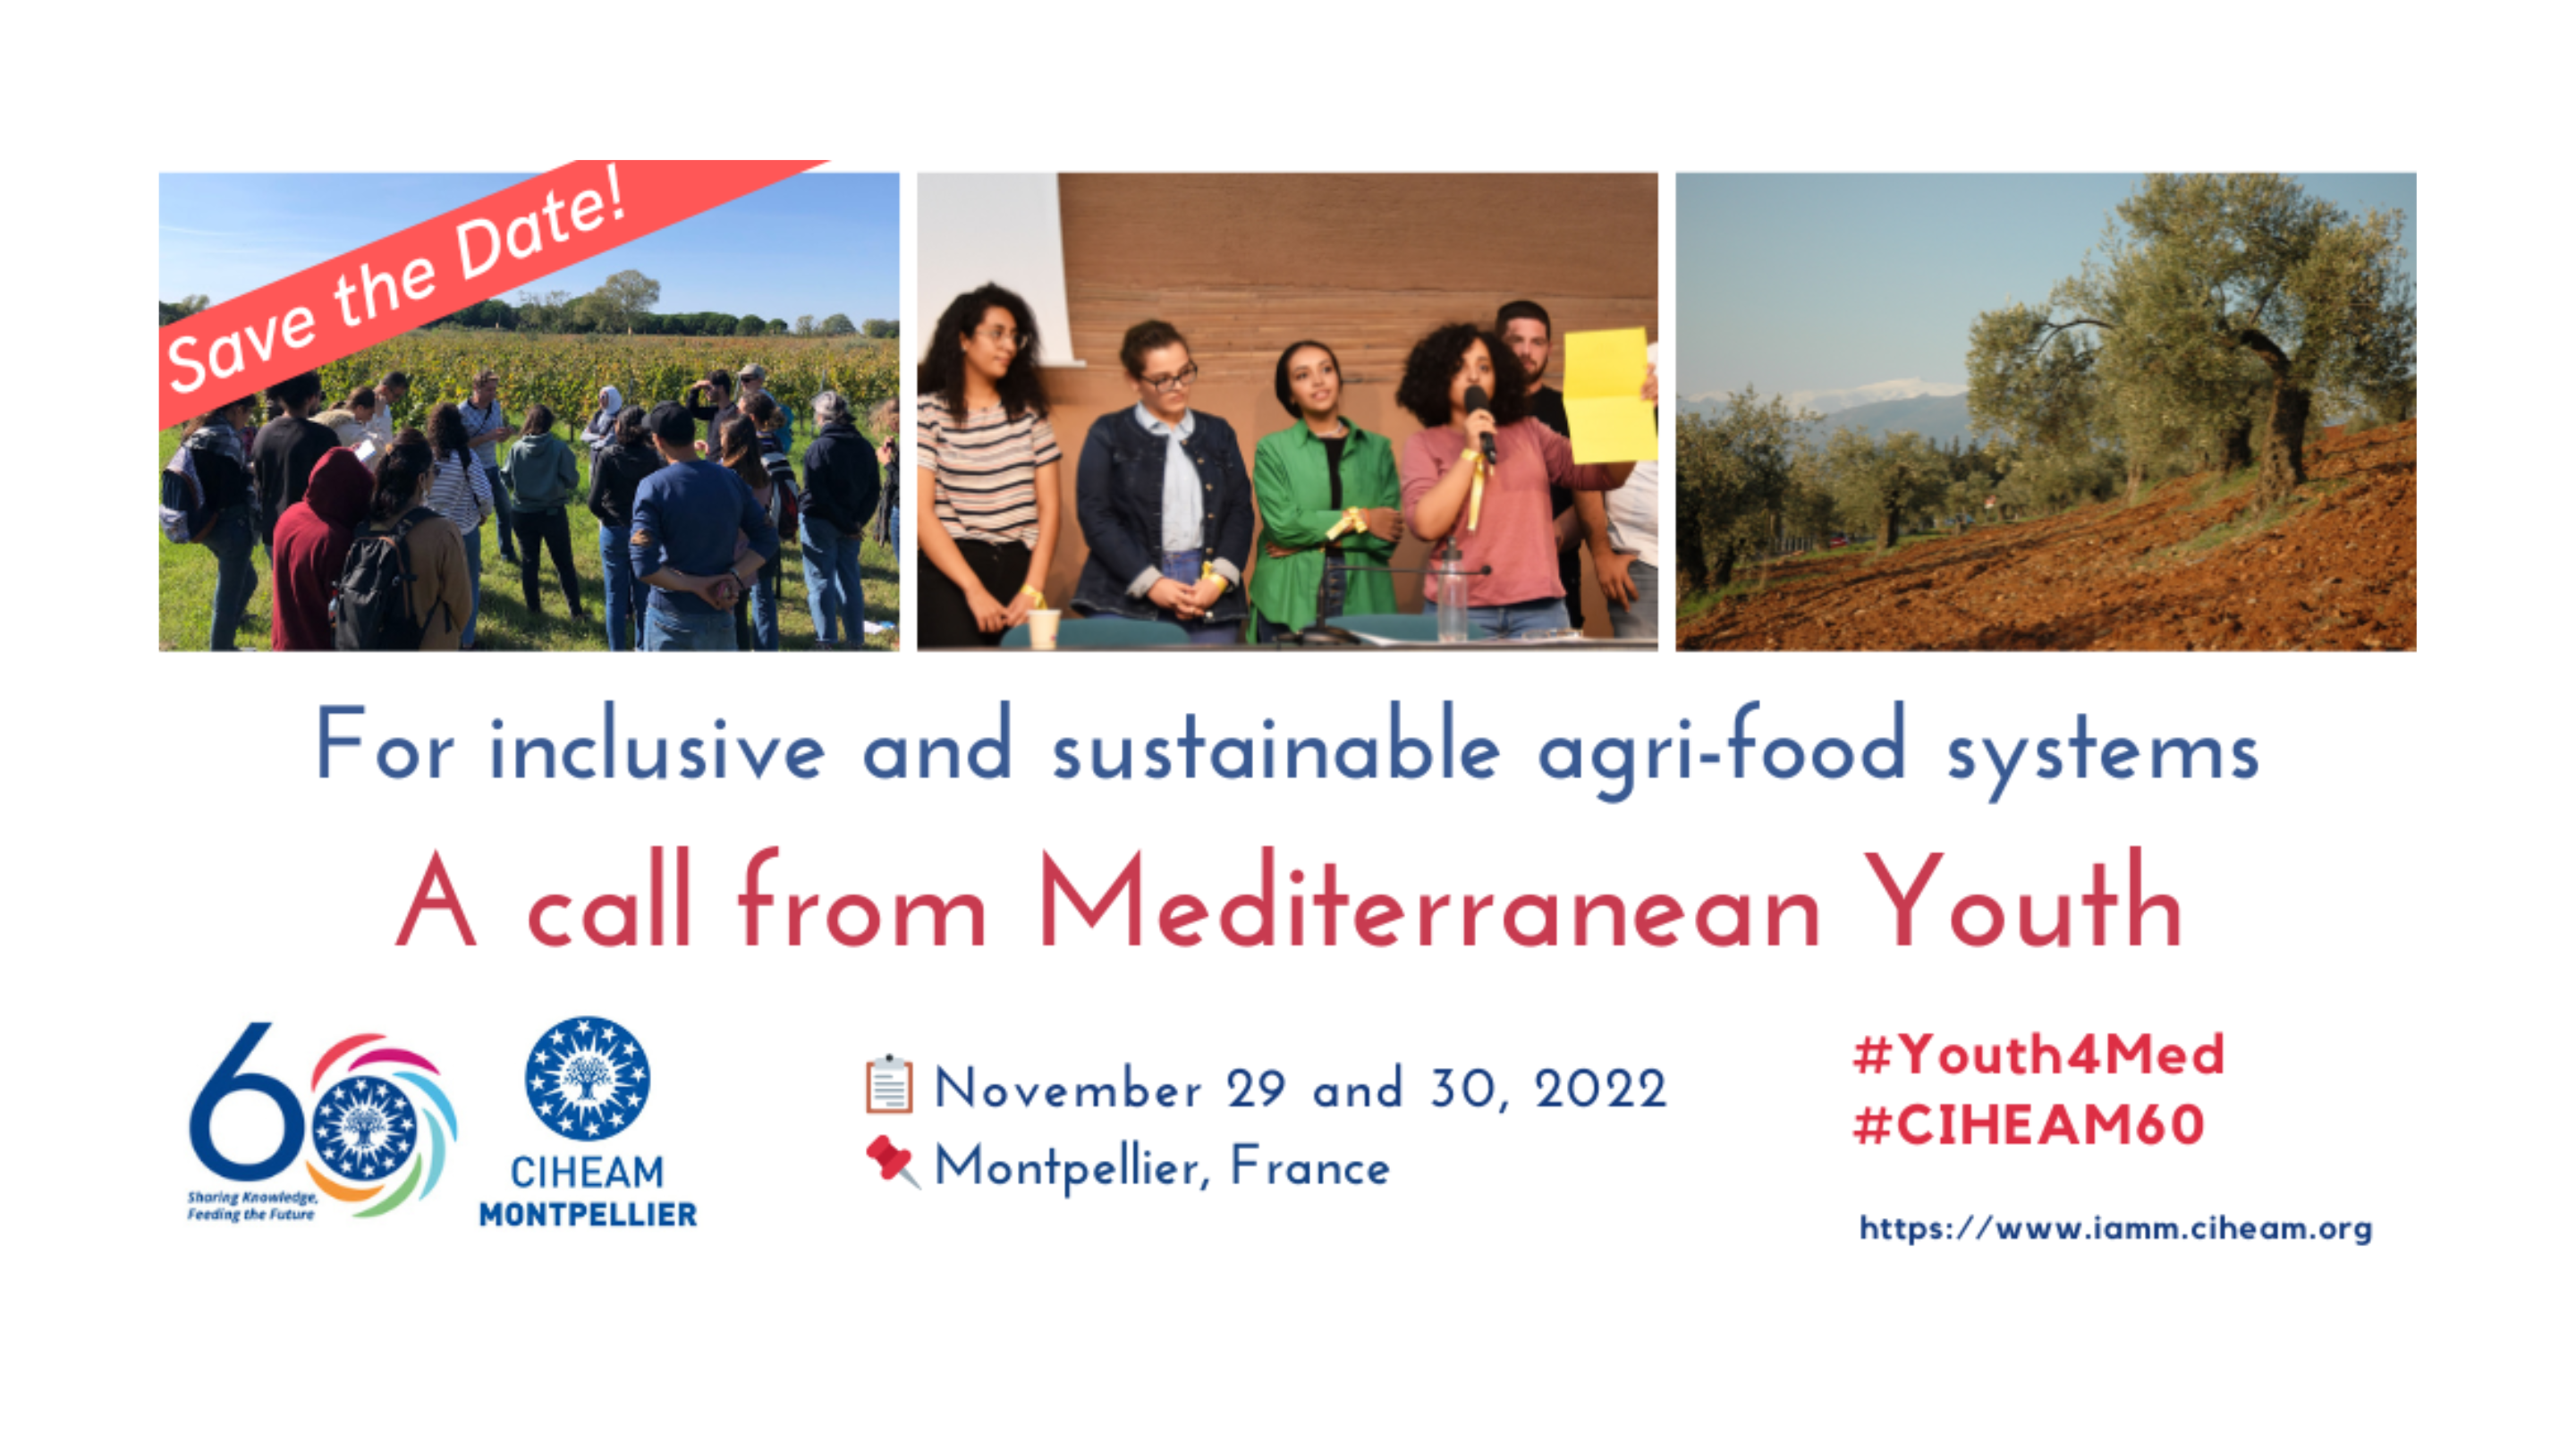 A CALL FROM MEDITERRANEAN YOUTH